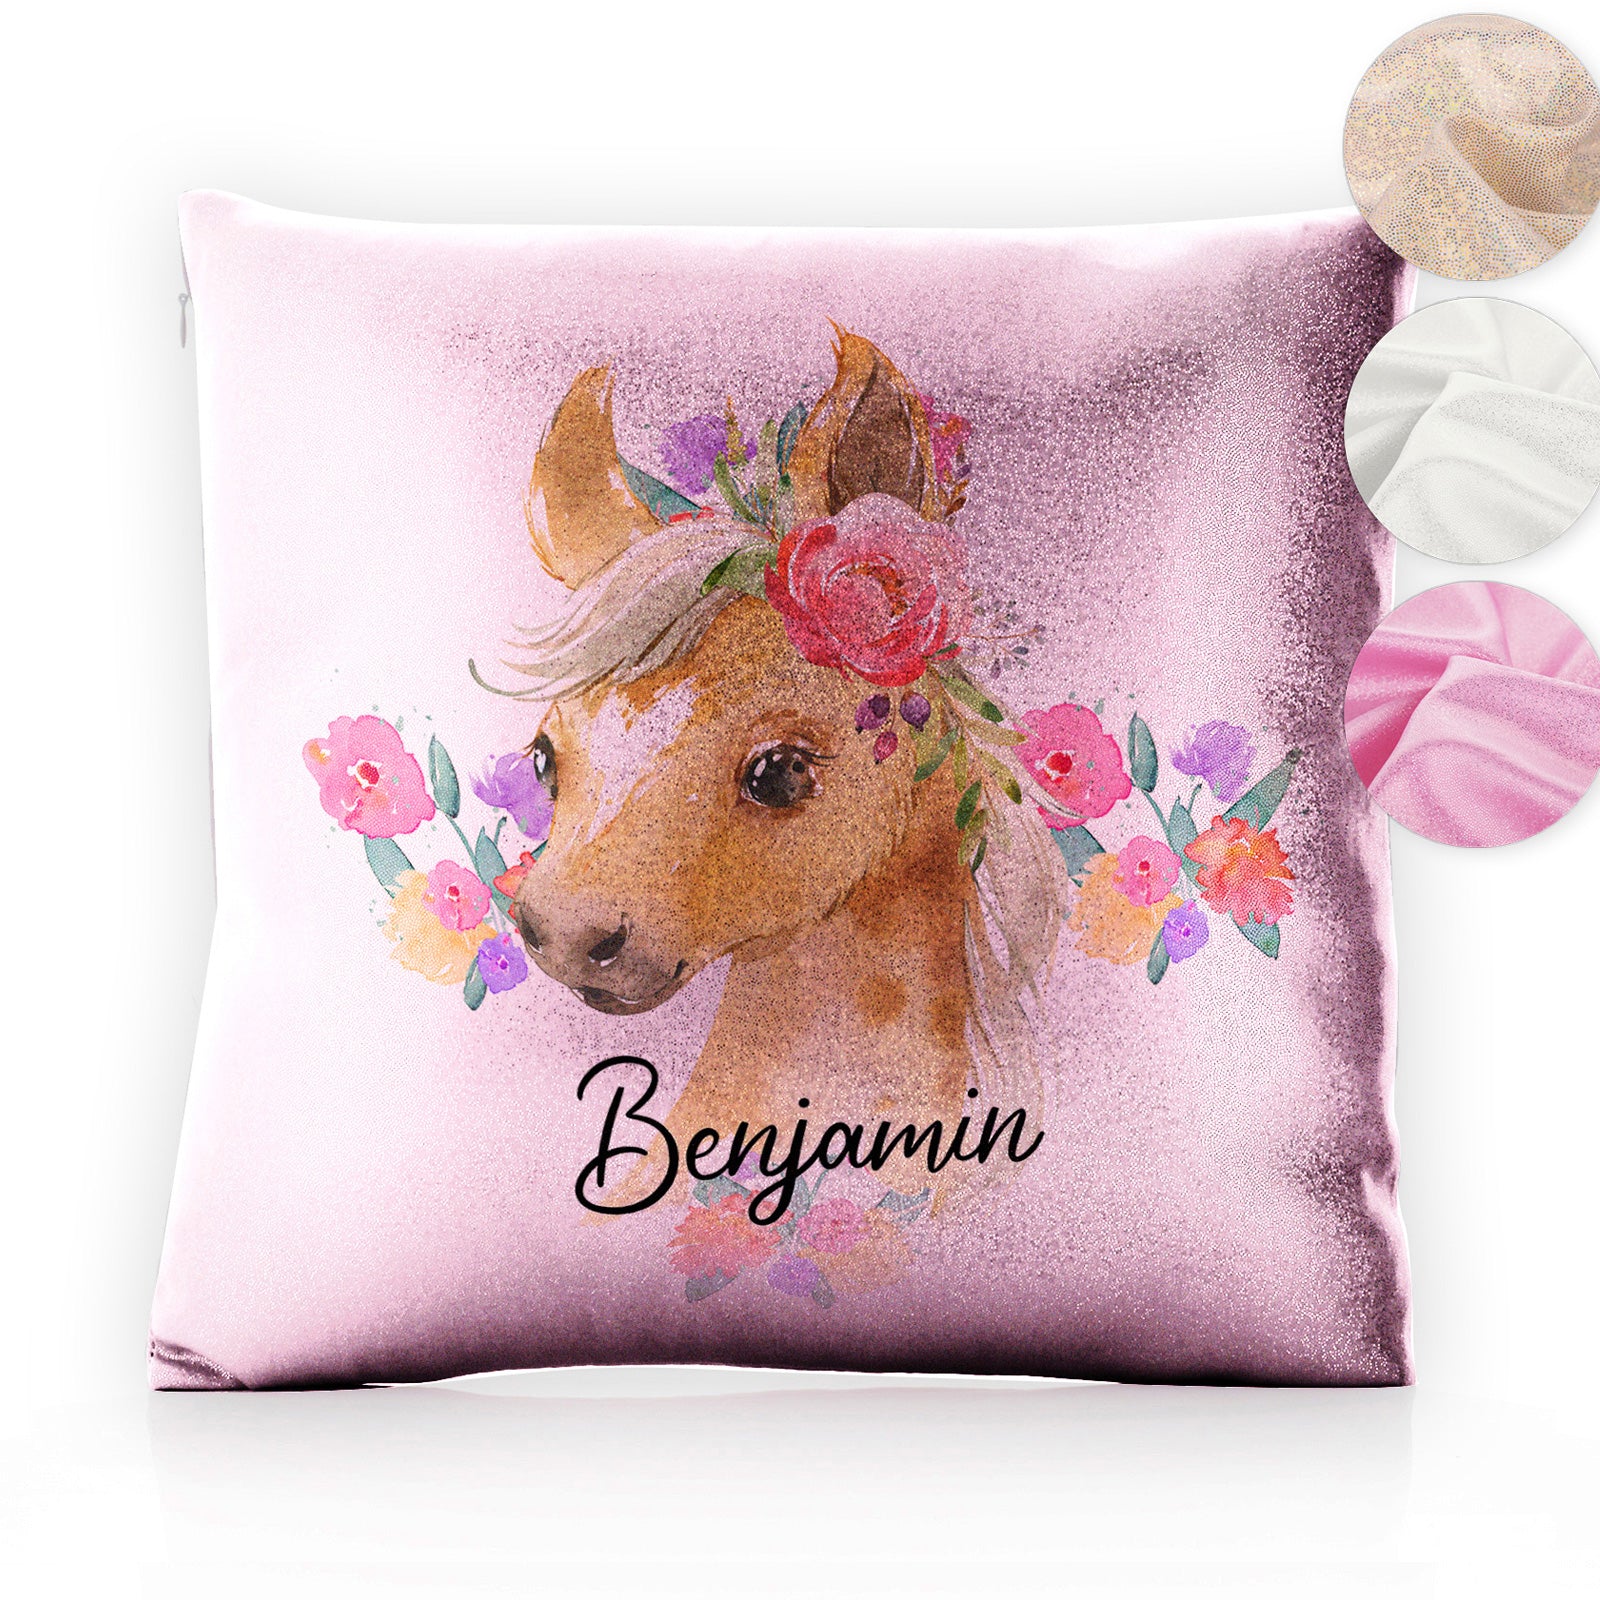 Personalised Glitter Cushion with Palomino Horse Multicolour Flower Print and Cute Text